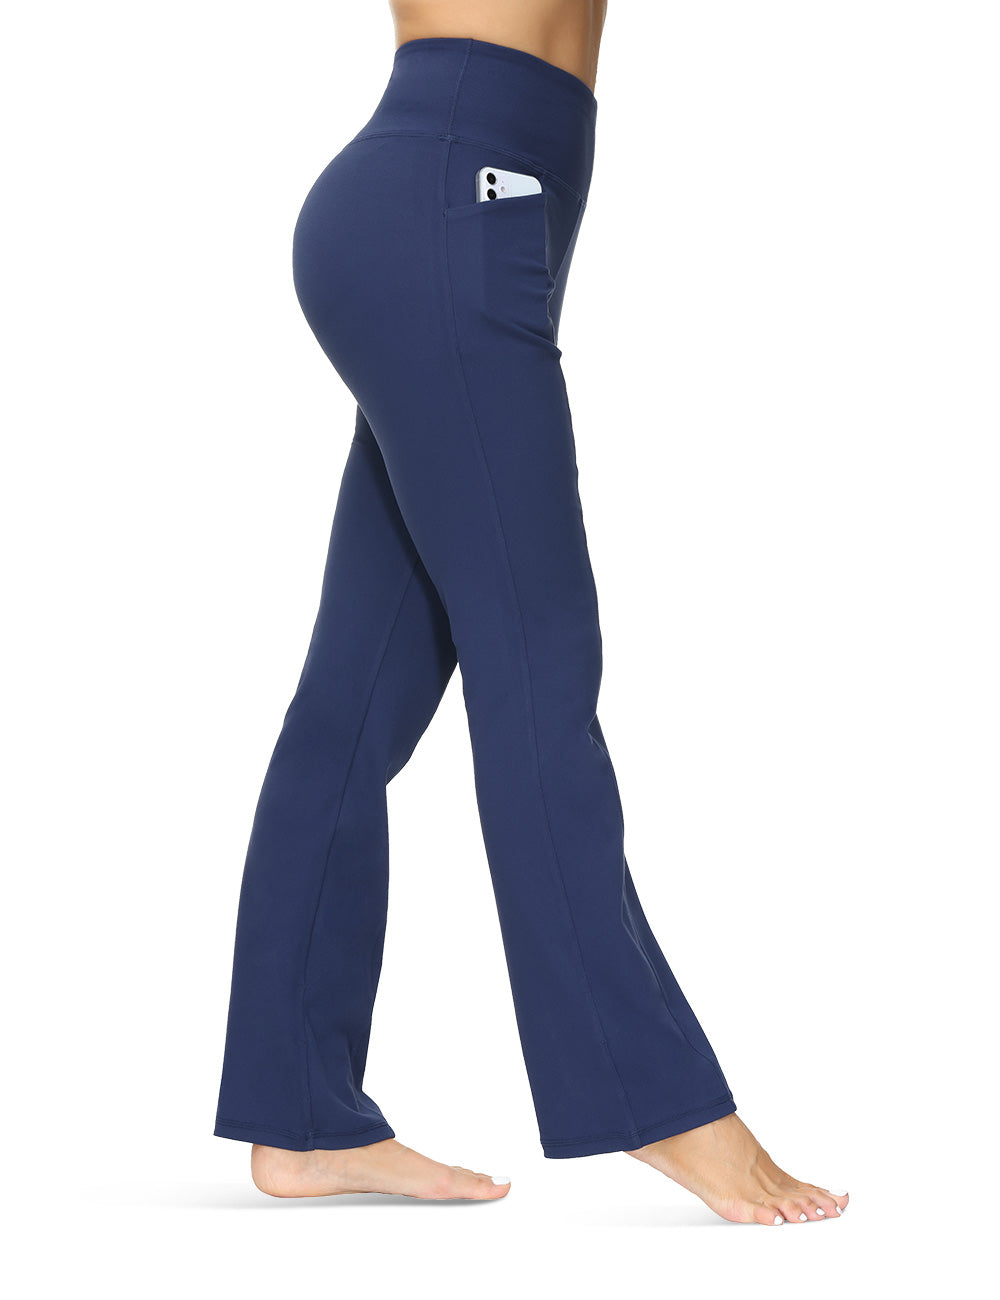 Bootcut yoga pants: an increasing trend in popularity – ALONGFIT